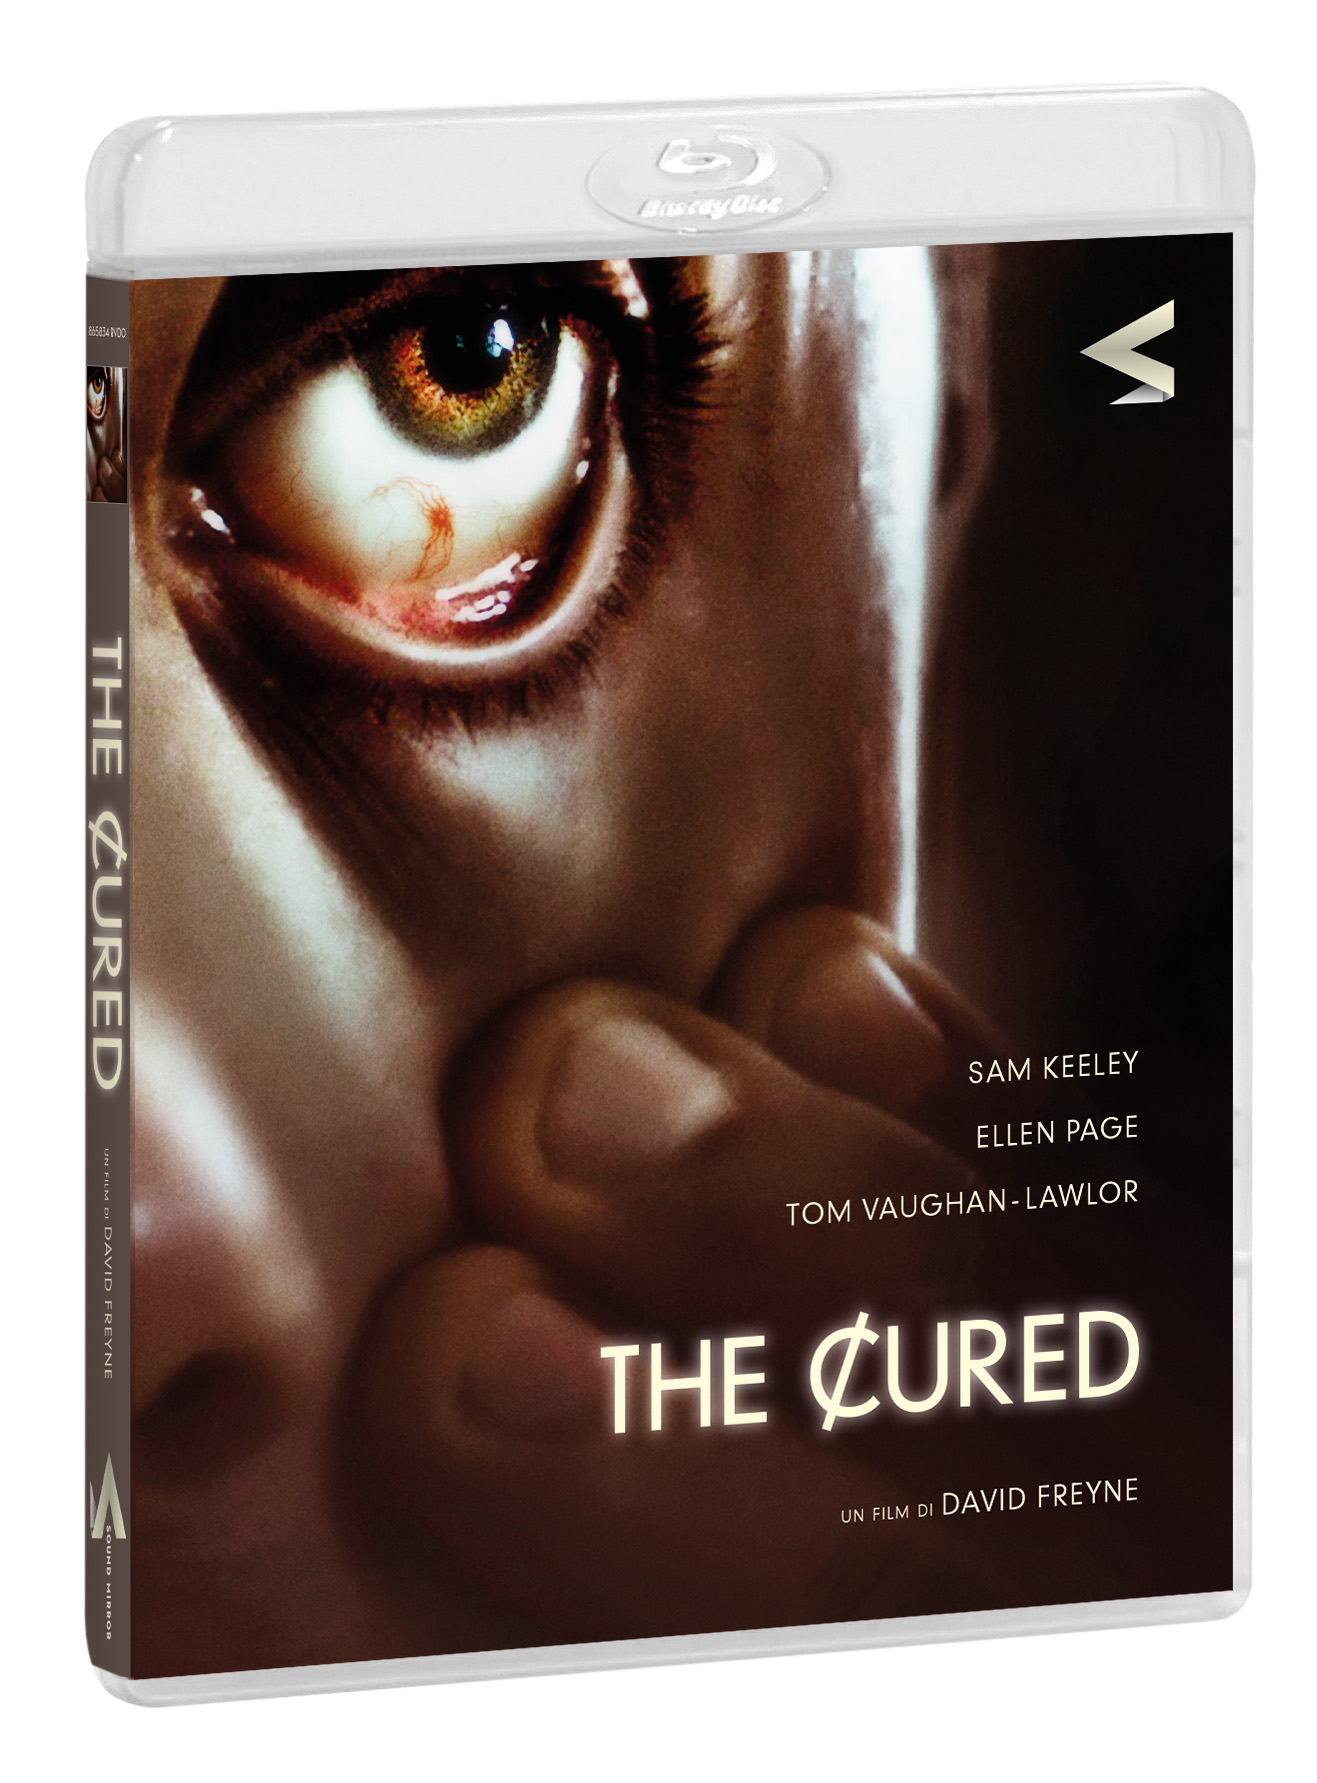 CURED (THE) (BLU-RAY+DVD)